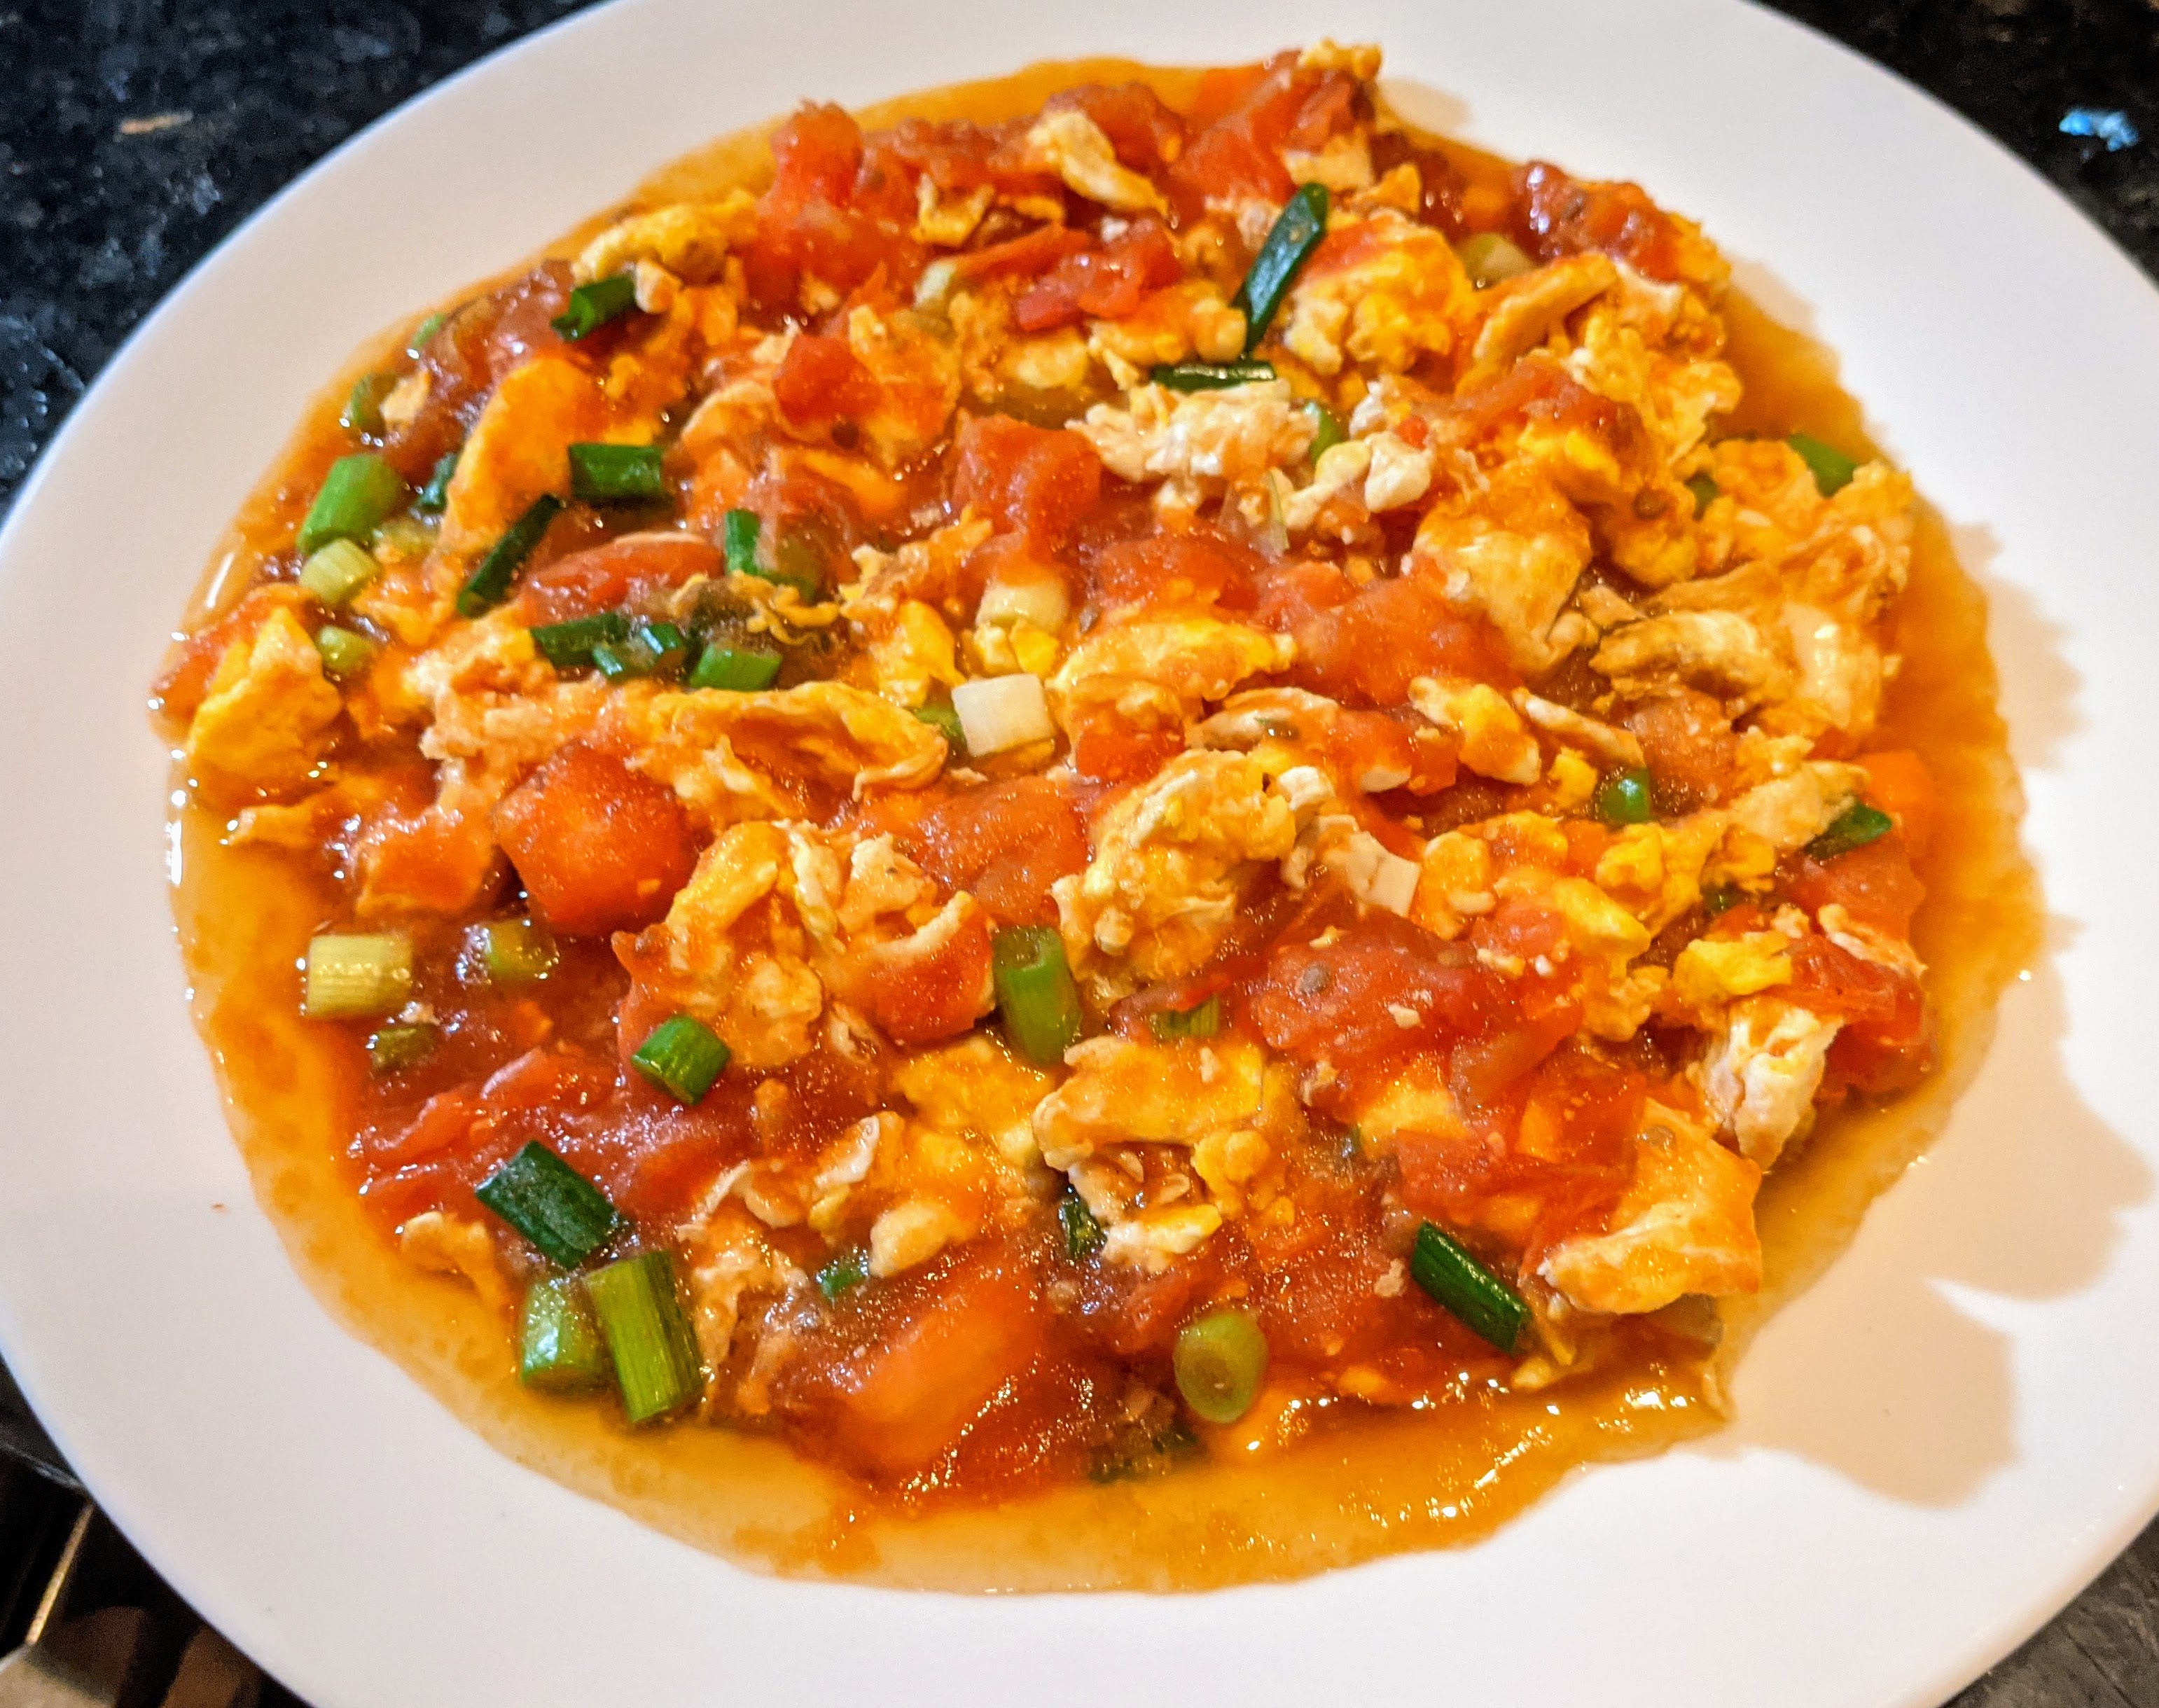 Stir-fried Tomato and Eggs